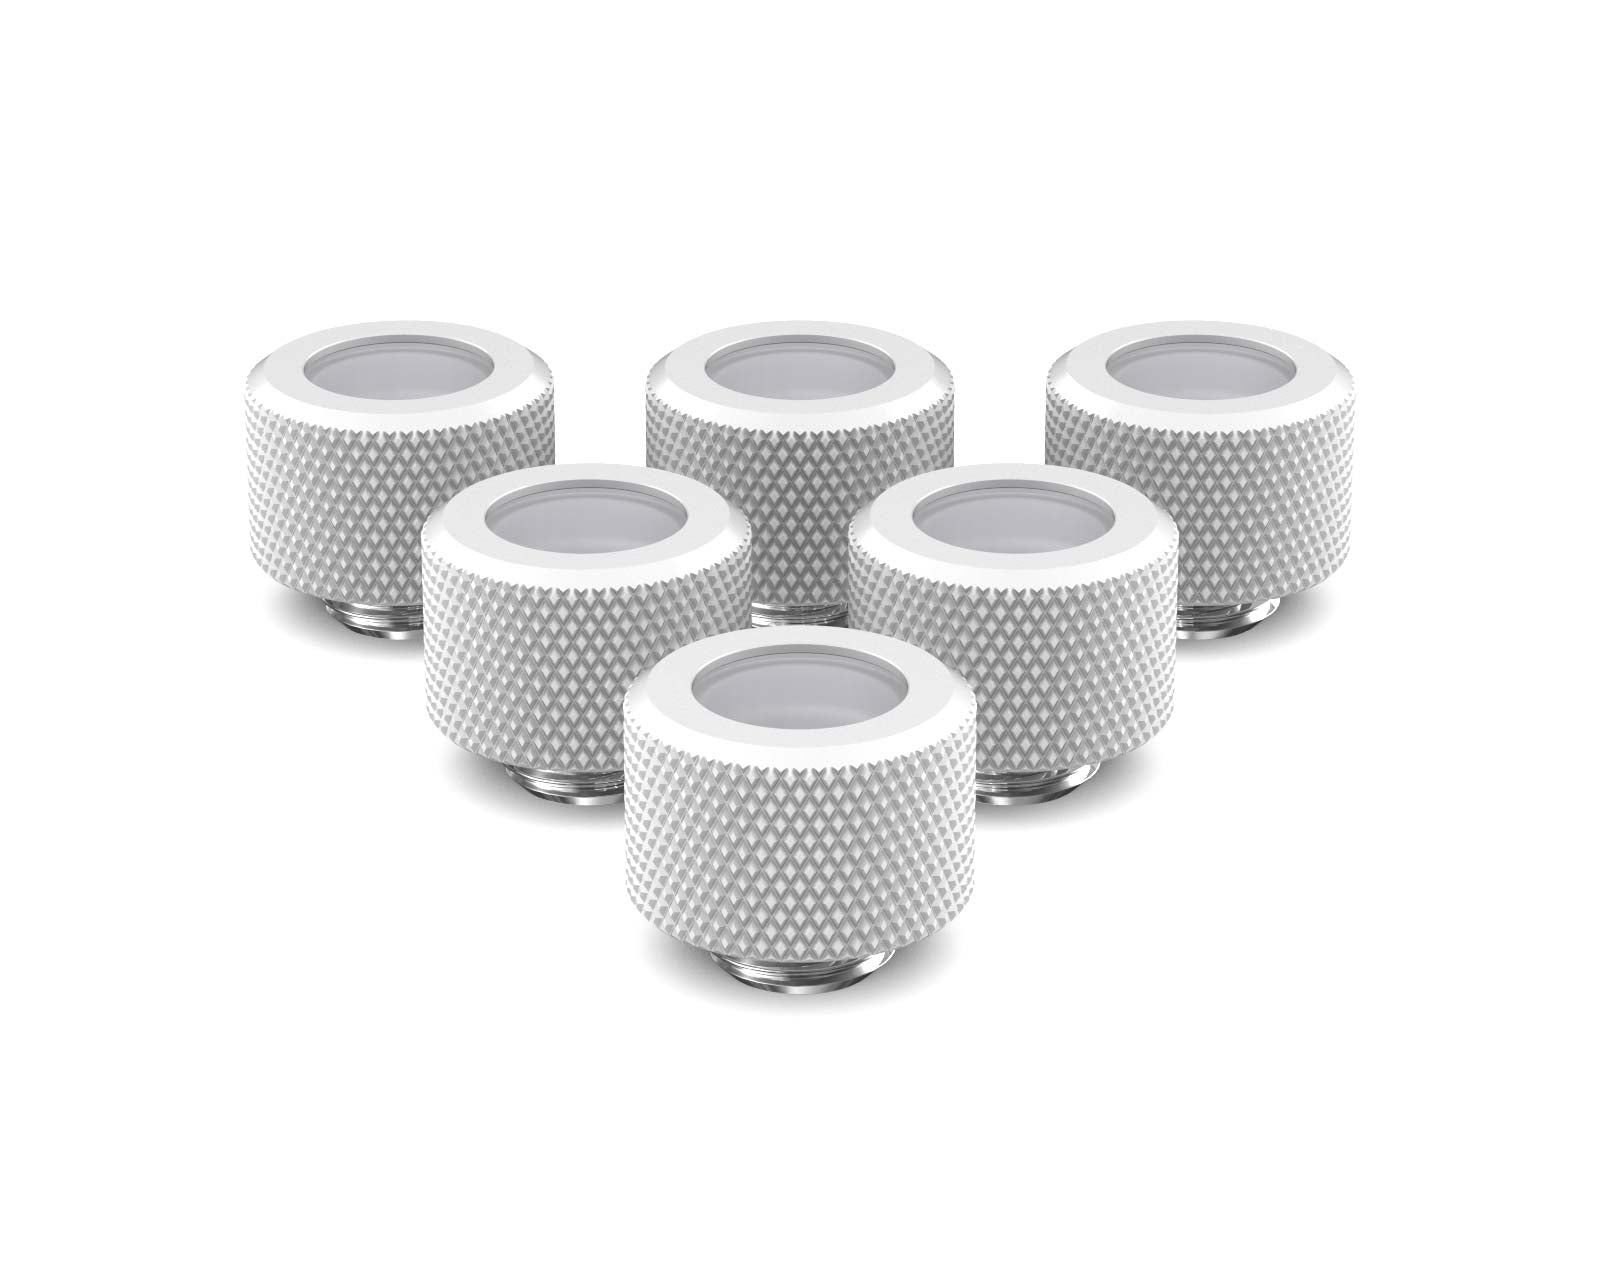 PrimoChill 14mm OD Rigid SX Fitting - 6 Pack - PrimoChill - KEEPING IT COOL Sky White